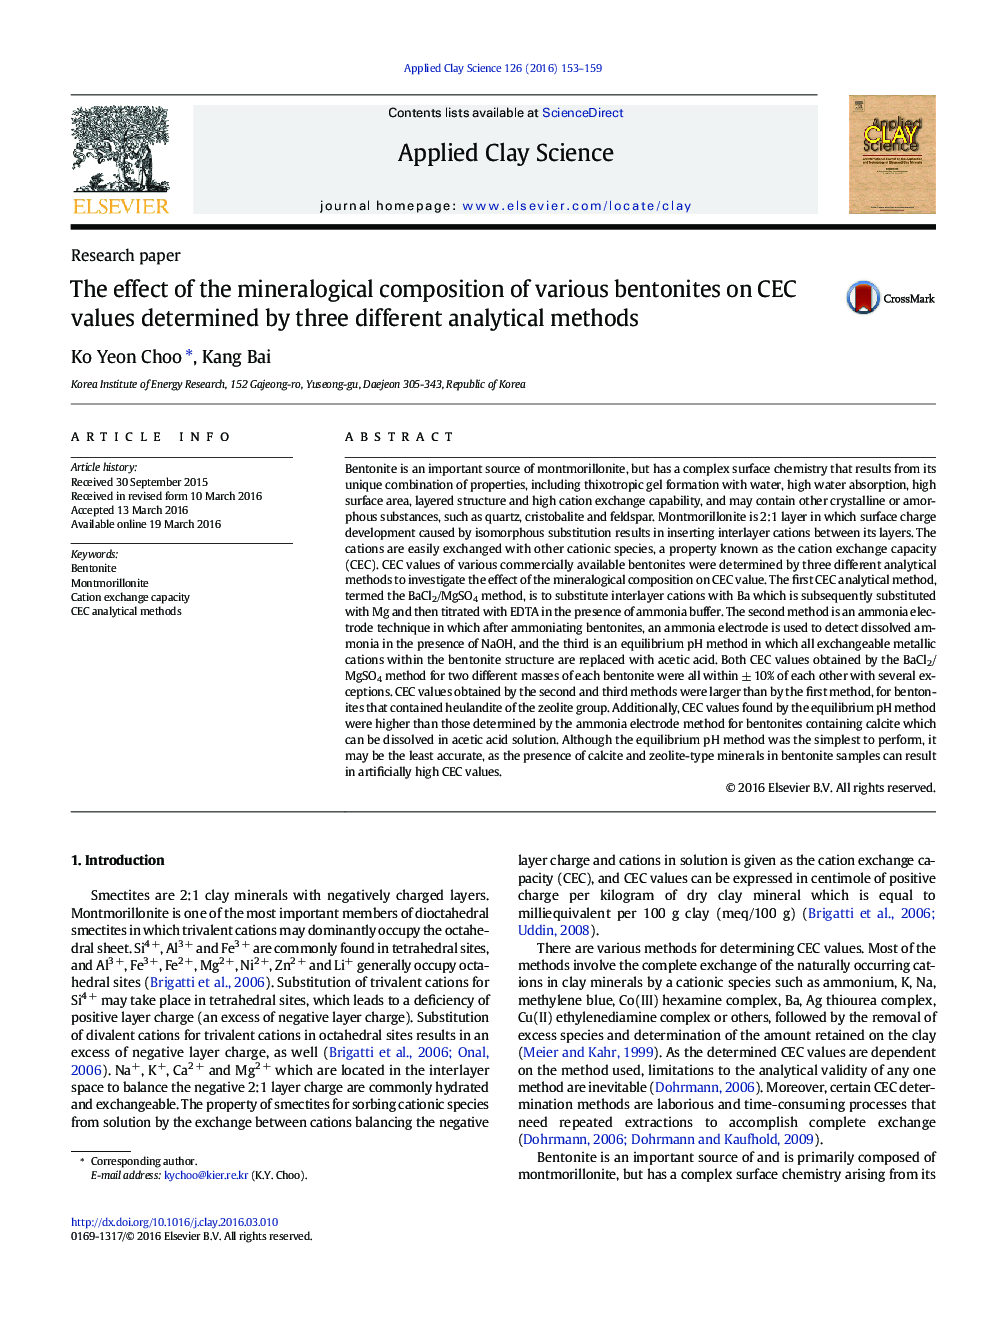 The effect of the mineralogical composition of various bentonites on CEC values determined by three different analytical methods